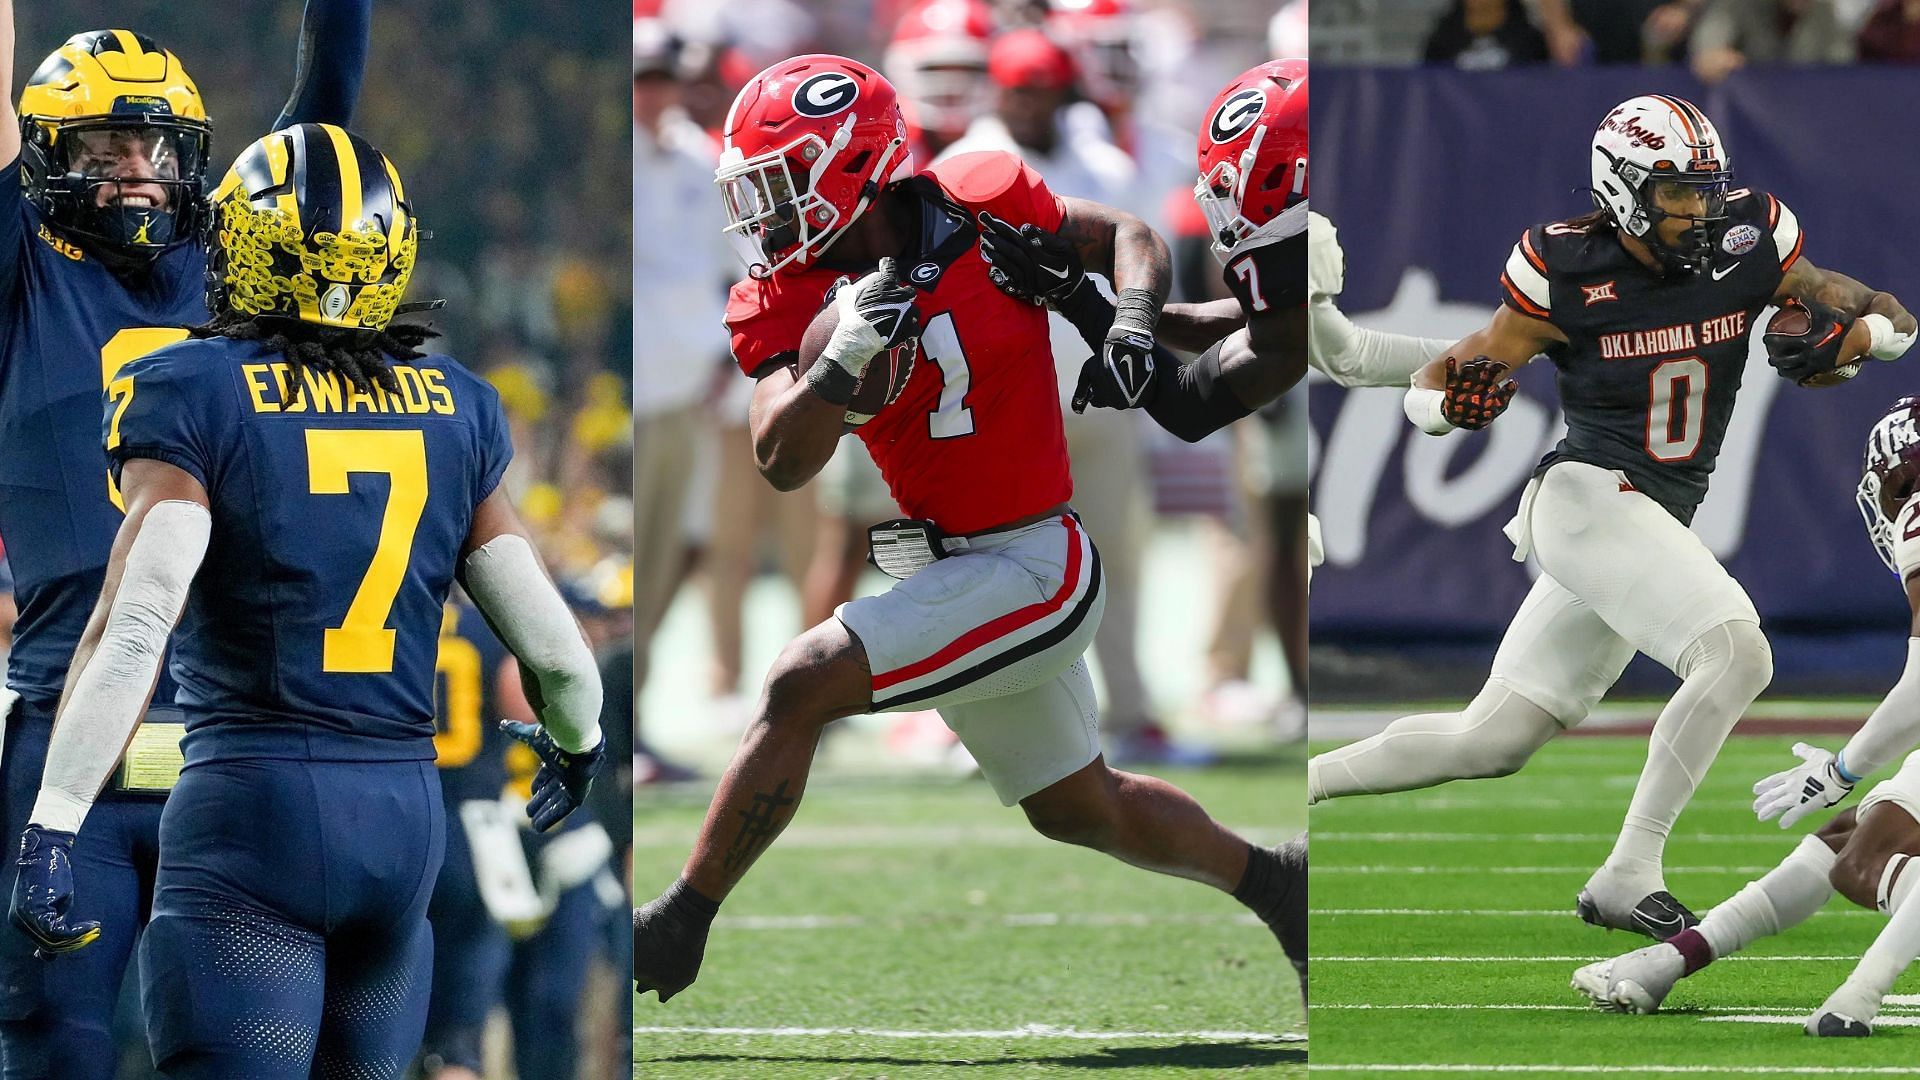 Donovan Edwards, Trevor Etienne, and Ollie Gordon II are among the top running back prospects for the 2025 NFL Draft